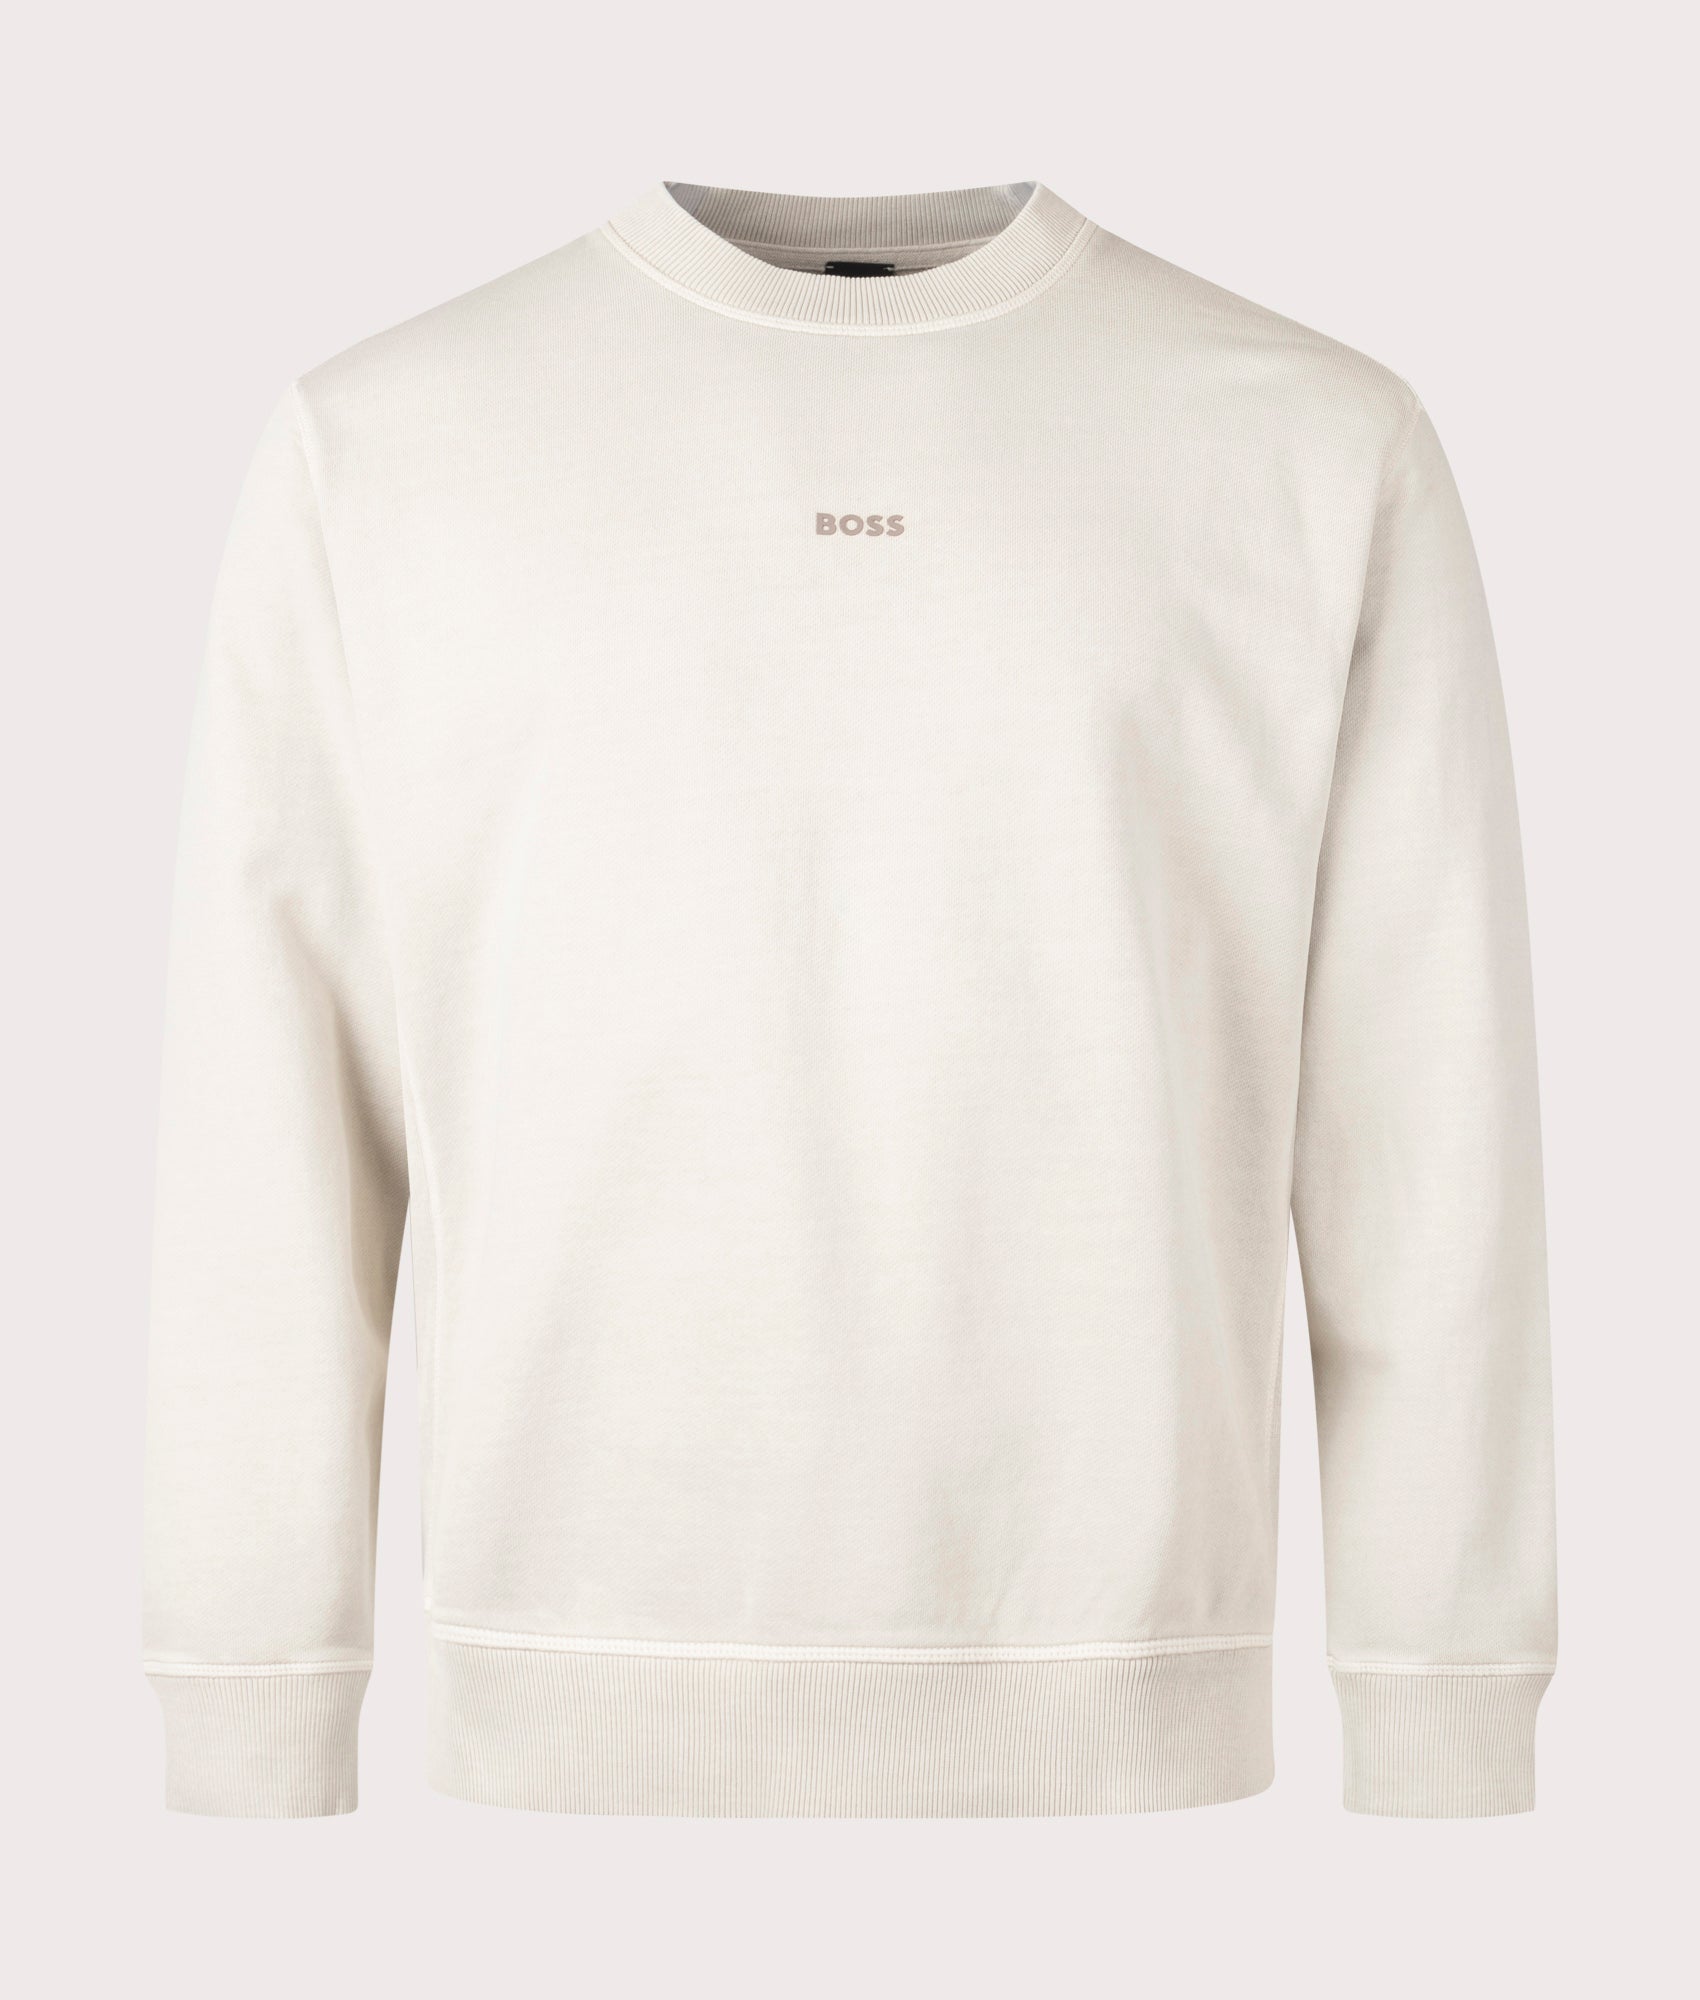 BOSS Mens Relaxed Fit Garment Dyed Wefade Sweatshirt - Colour: 271 Light Beige - Size: Small